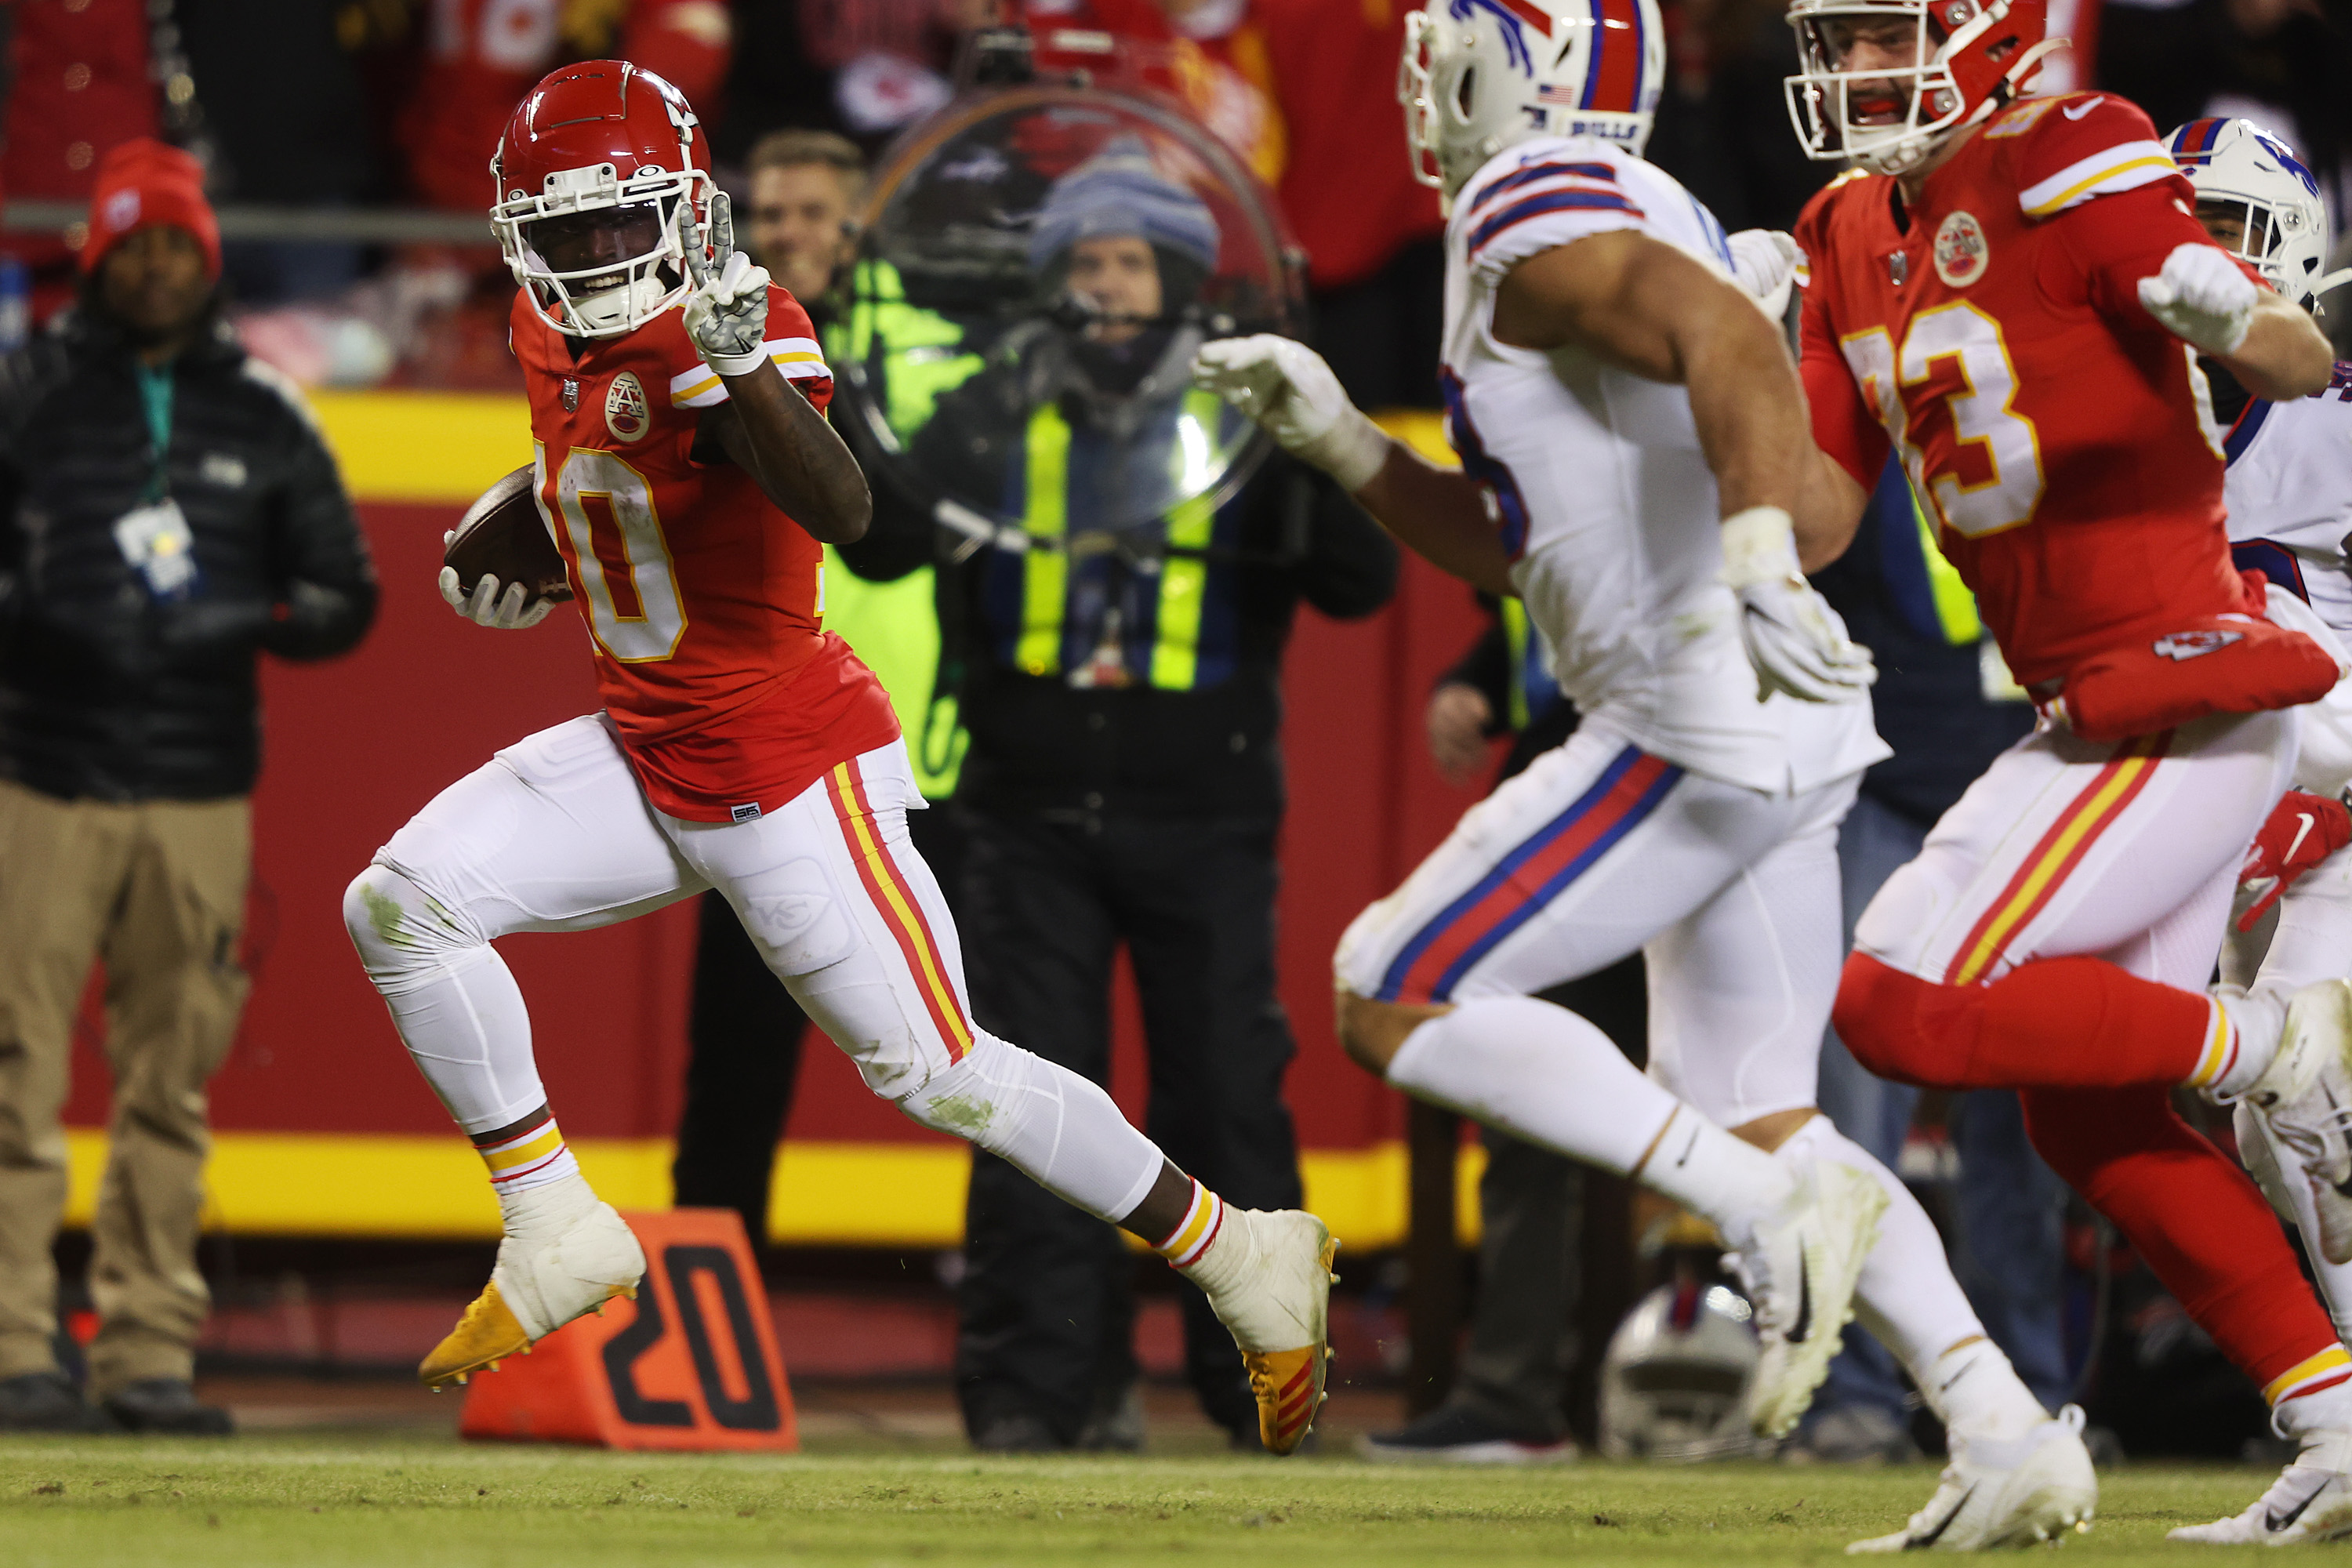 Tyreek Hill #10 of the Kansas City Chiefs scores a 64 yard touchdown against the Buffalo Bills during the fourth quarter in the AFC Divisional Playoff game at Arrowhead Stadium on January 23, 2022 in Kansas City, Missouri.